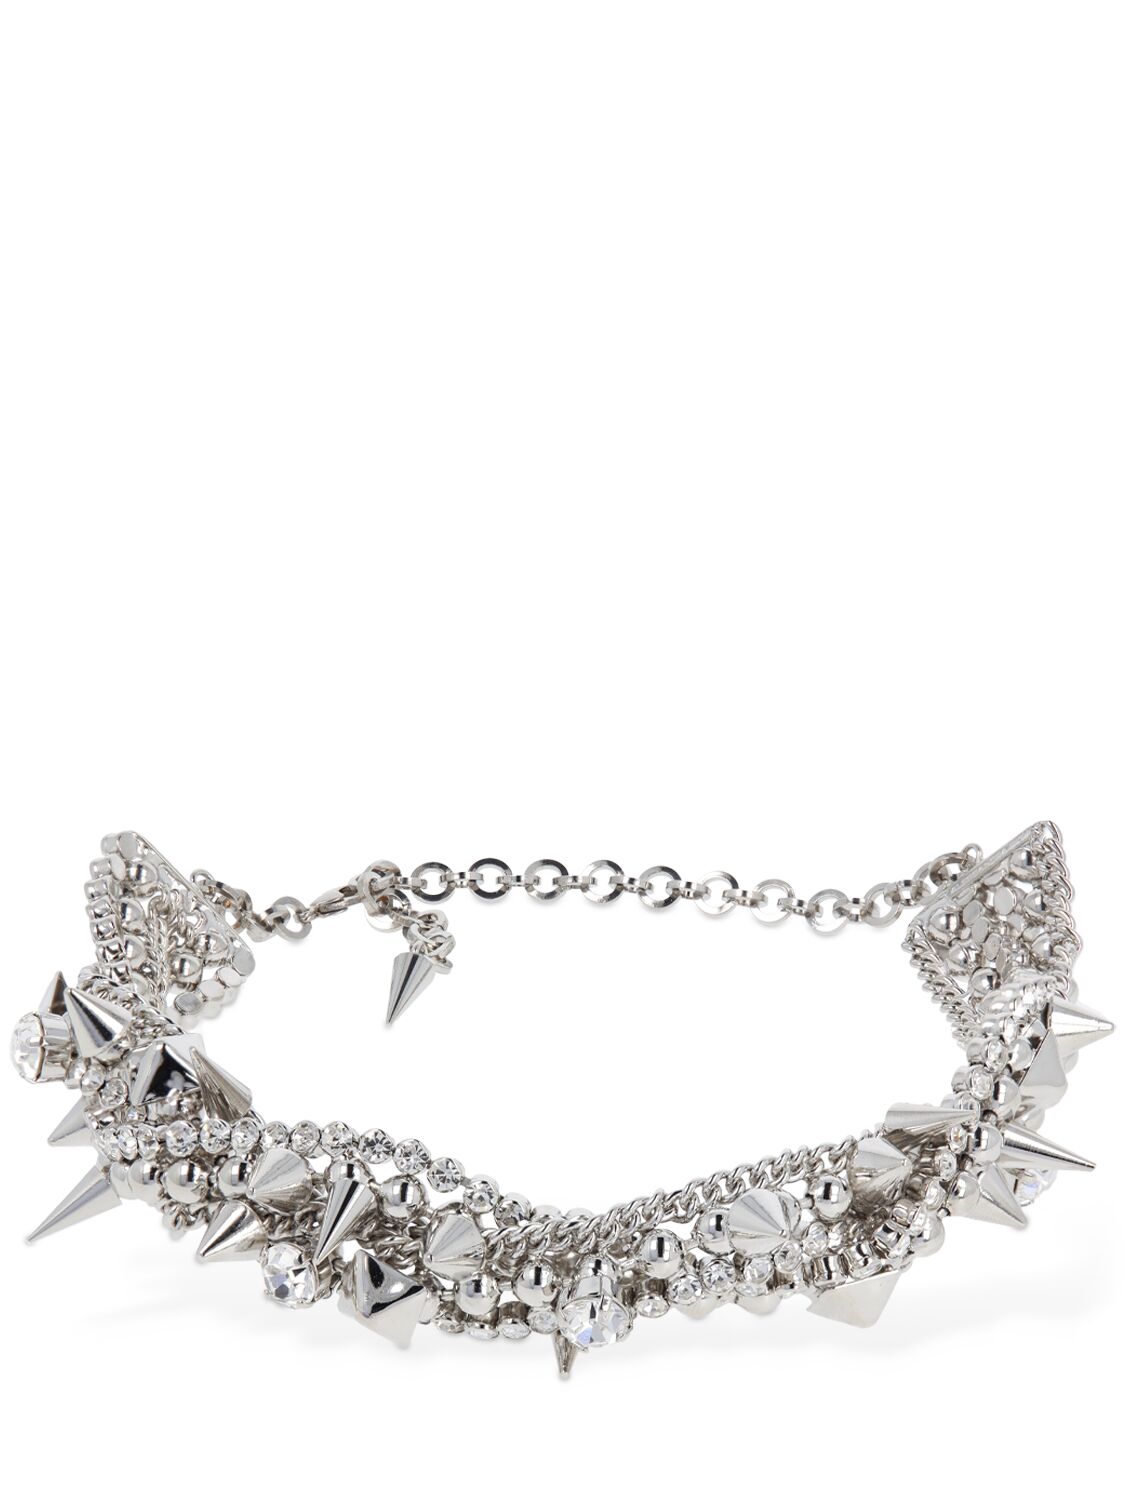 Alessandra Rich Twisted Choker W/ Crystals & Spikes In Silver